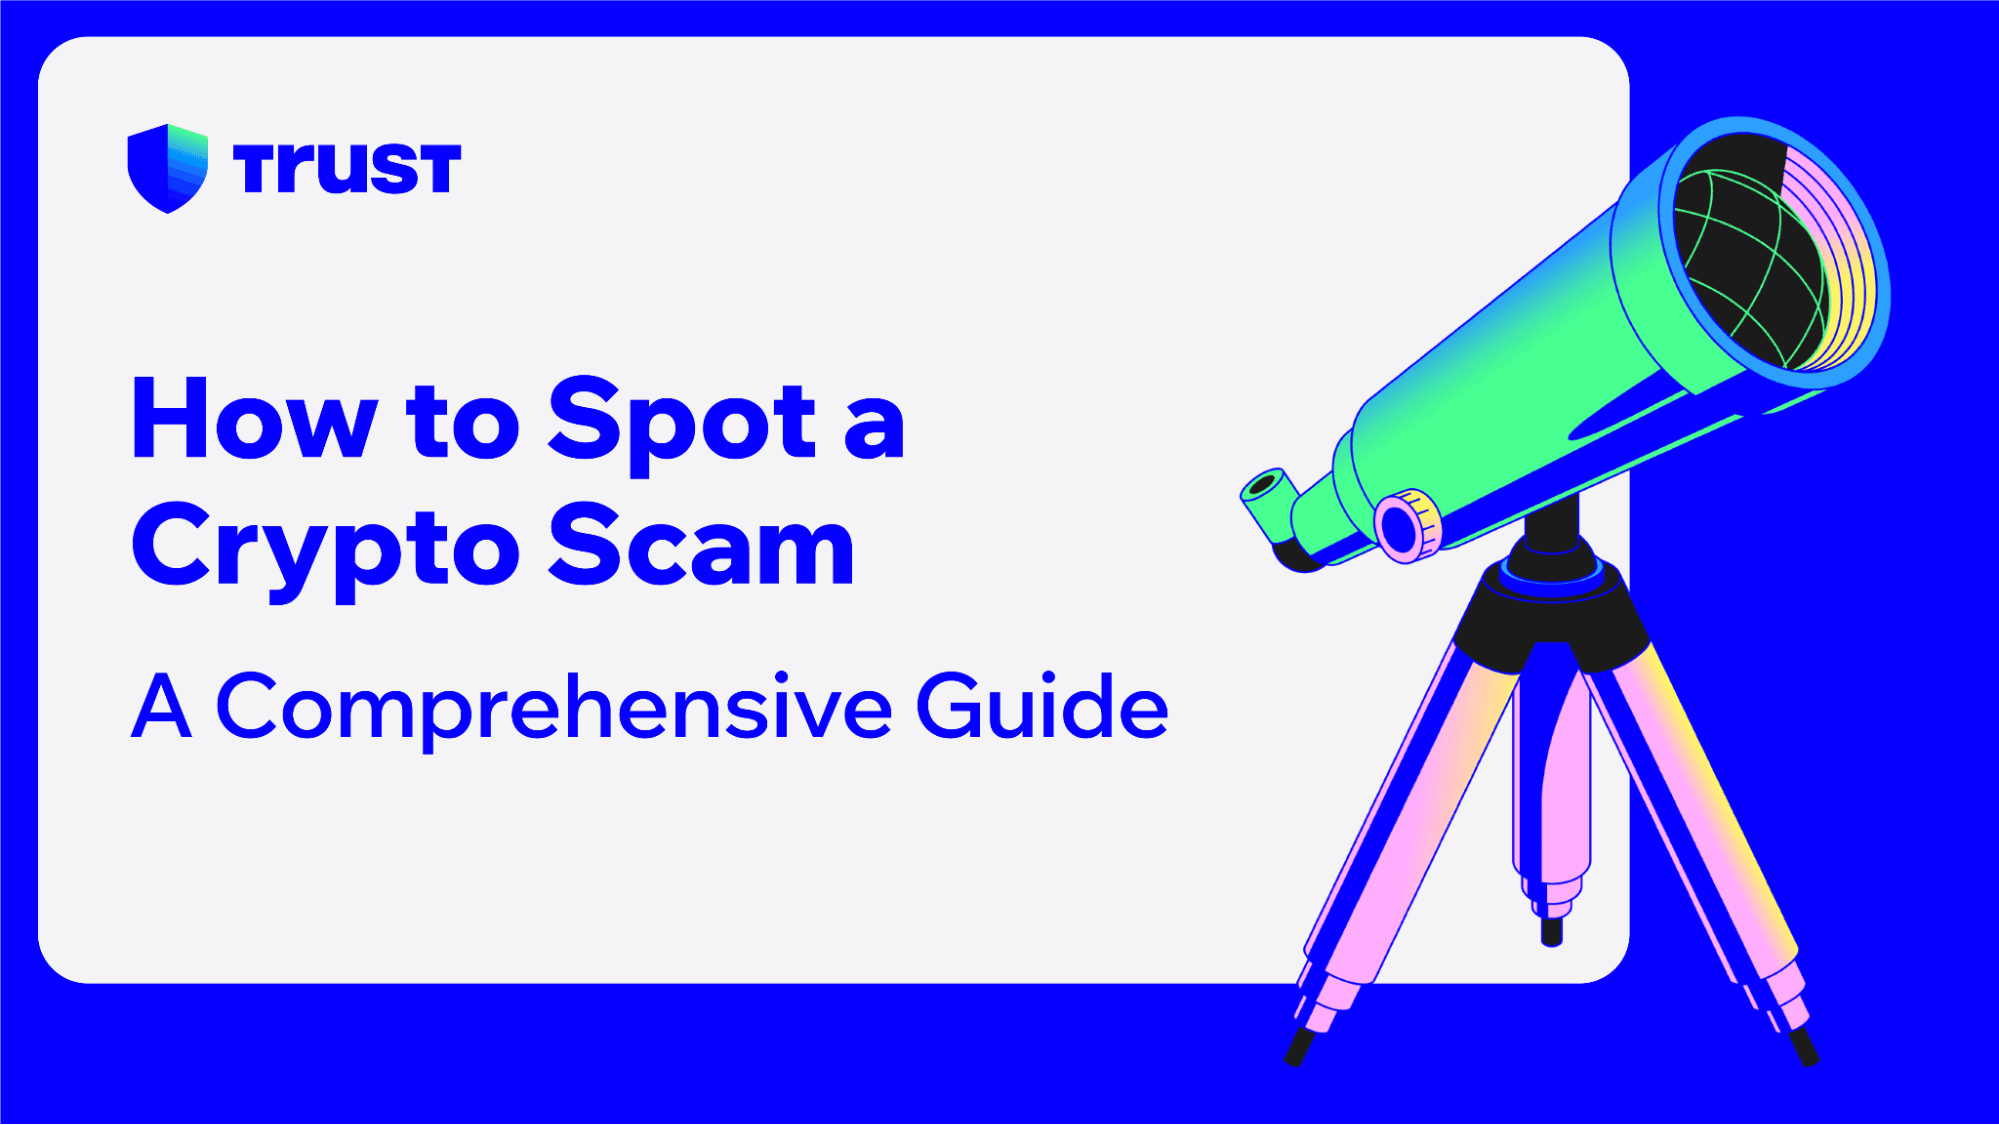 How to Spot a Crypto Scam